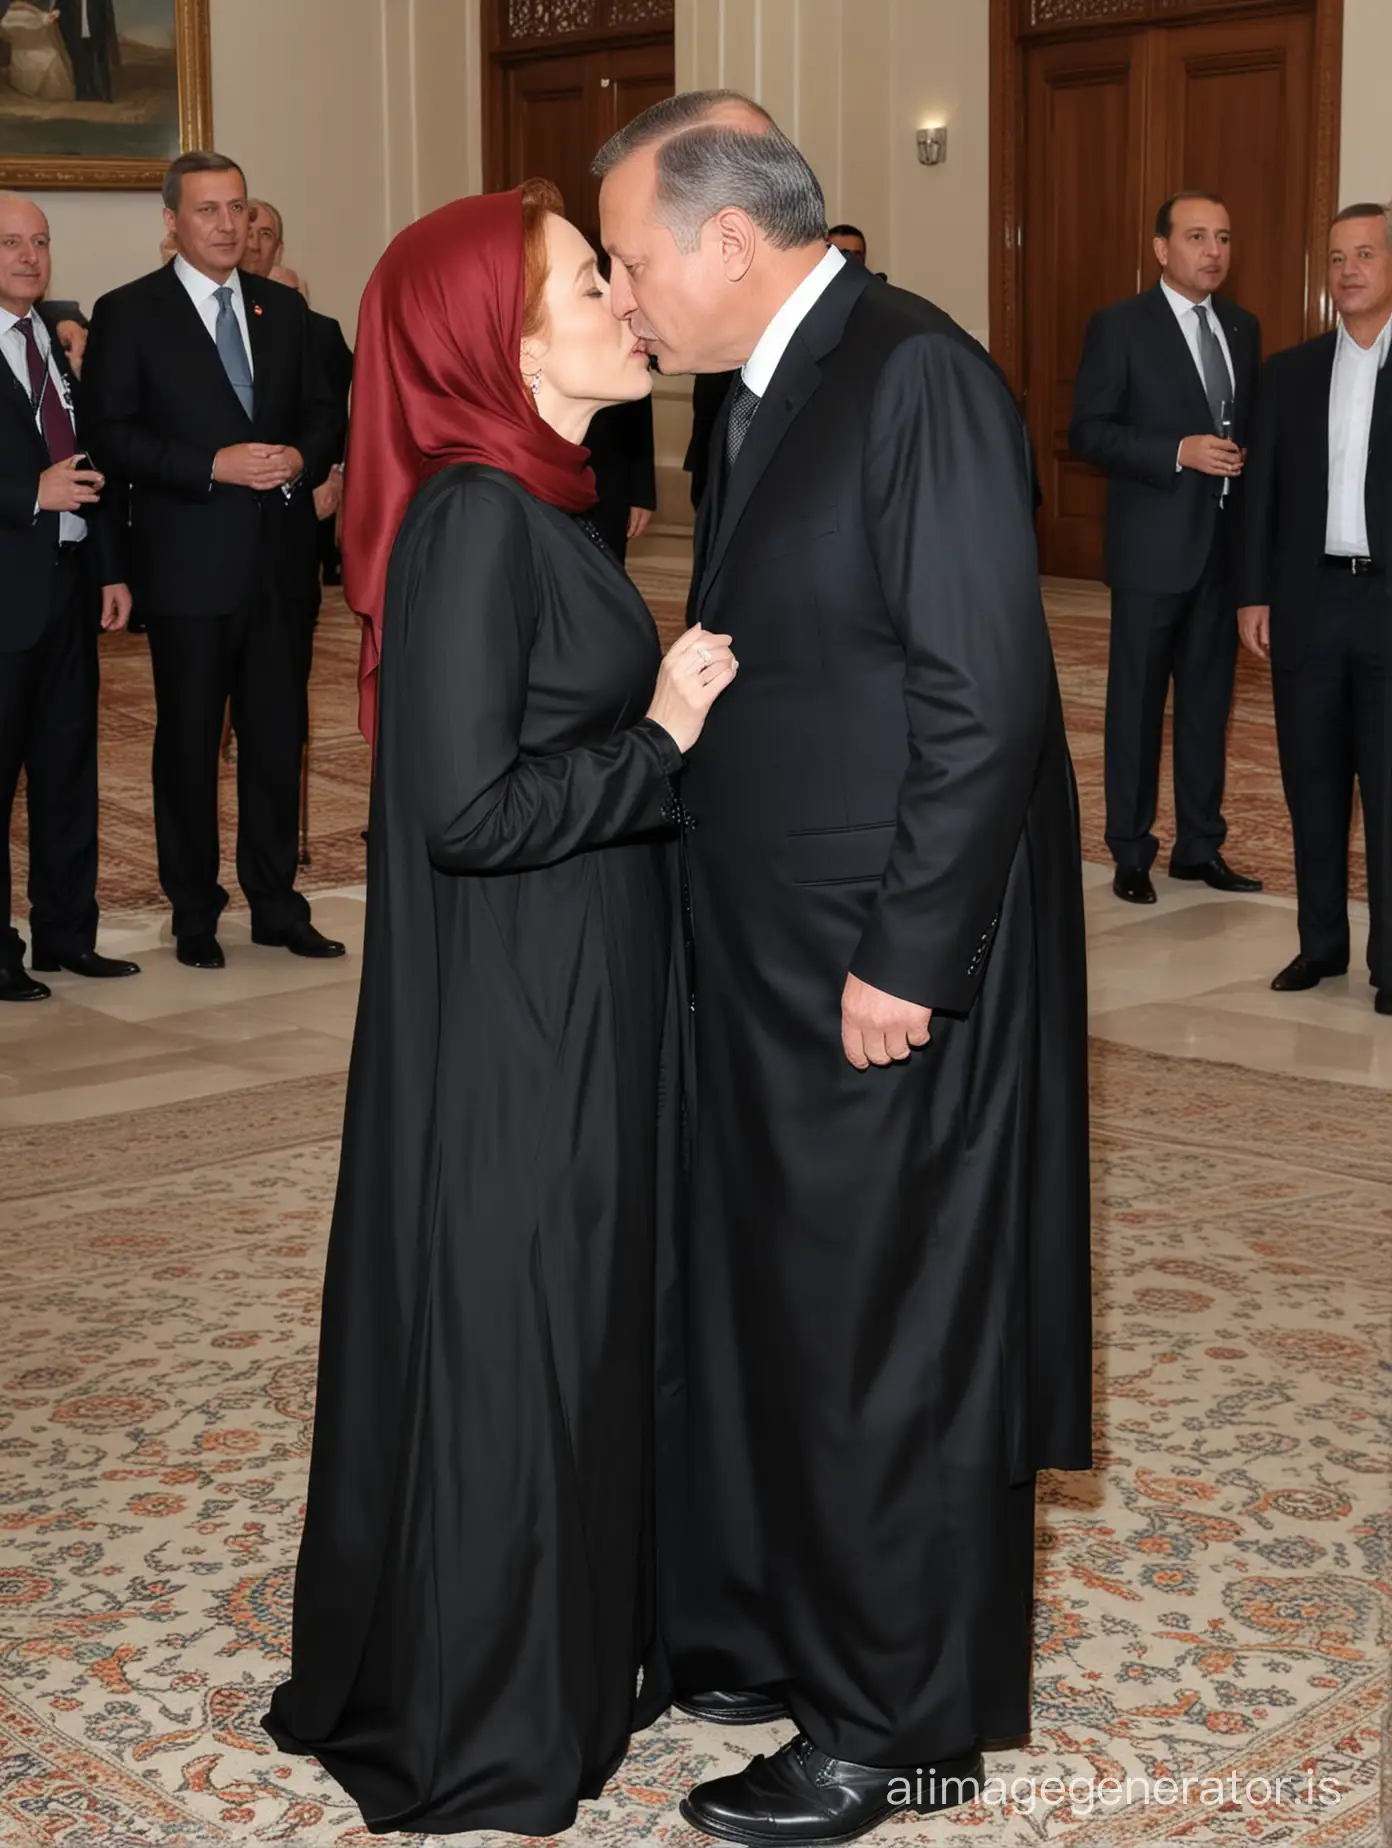 red haired Gillian Anderson alone with President Erdogan, he asked Gillian to dress accordingly to his Muslim faith and wear a floor-length black oversized jilbab with long black hijab while he is kissing her tenderly